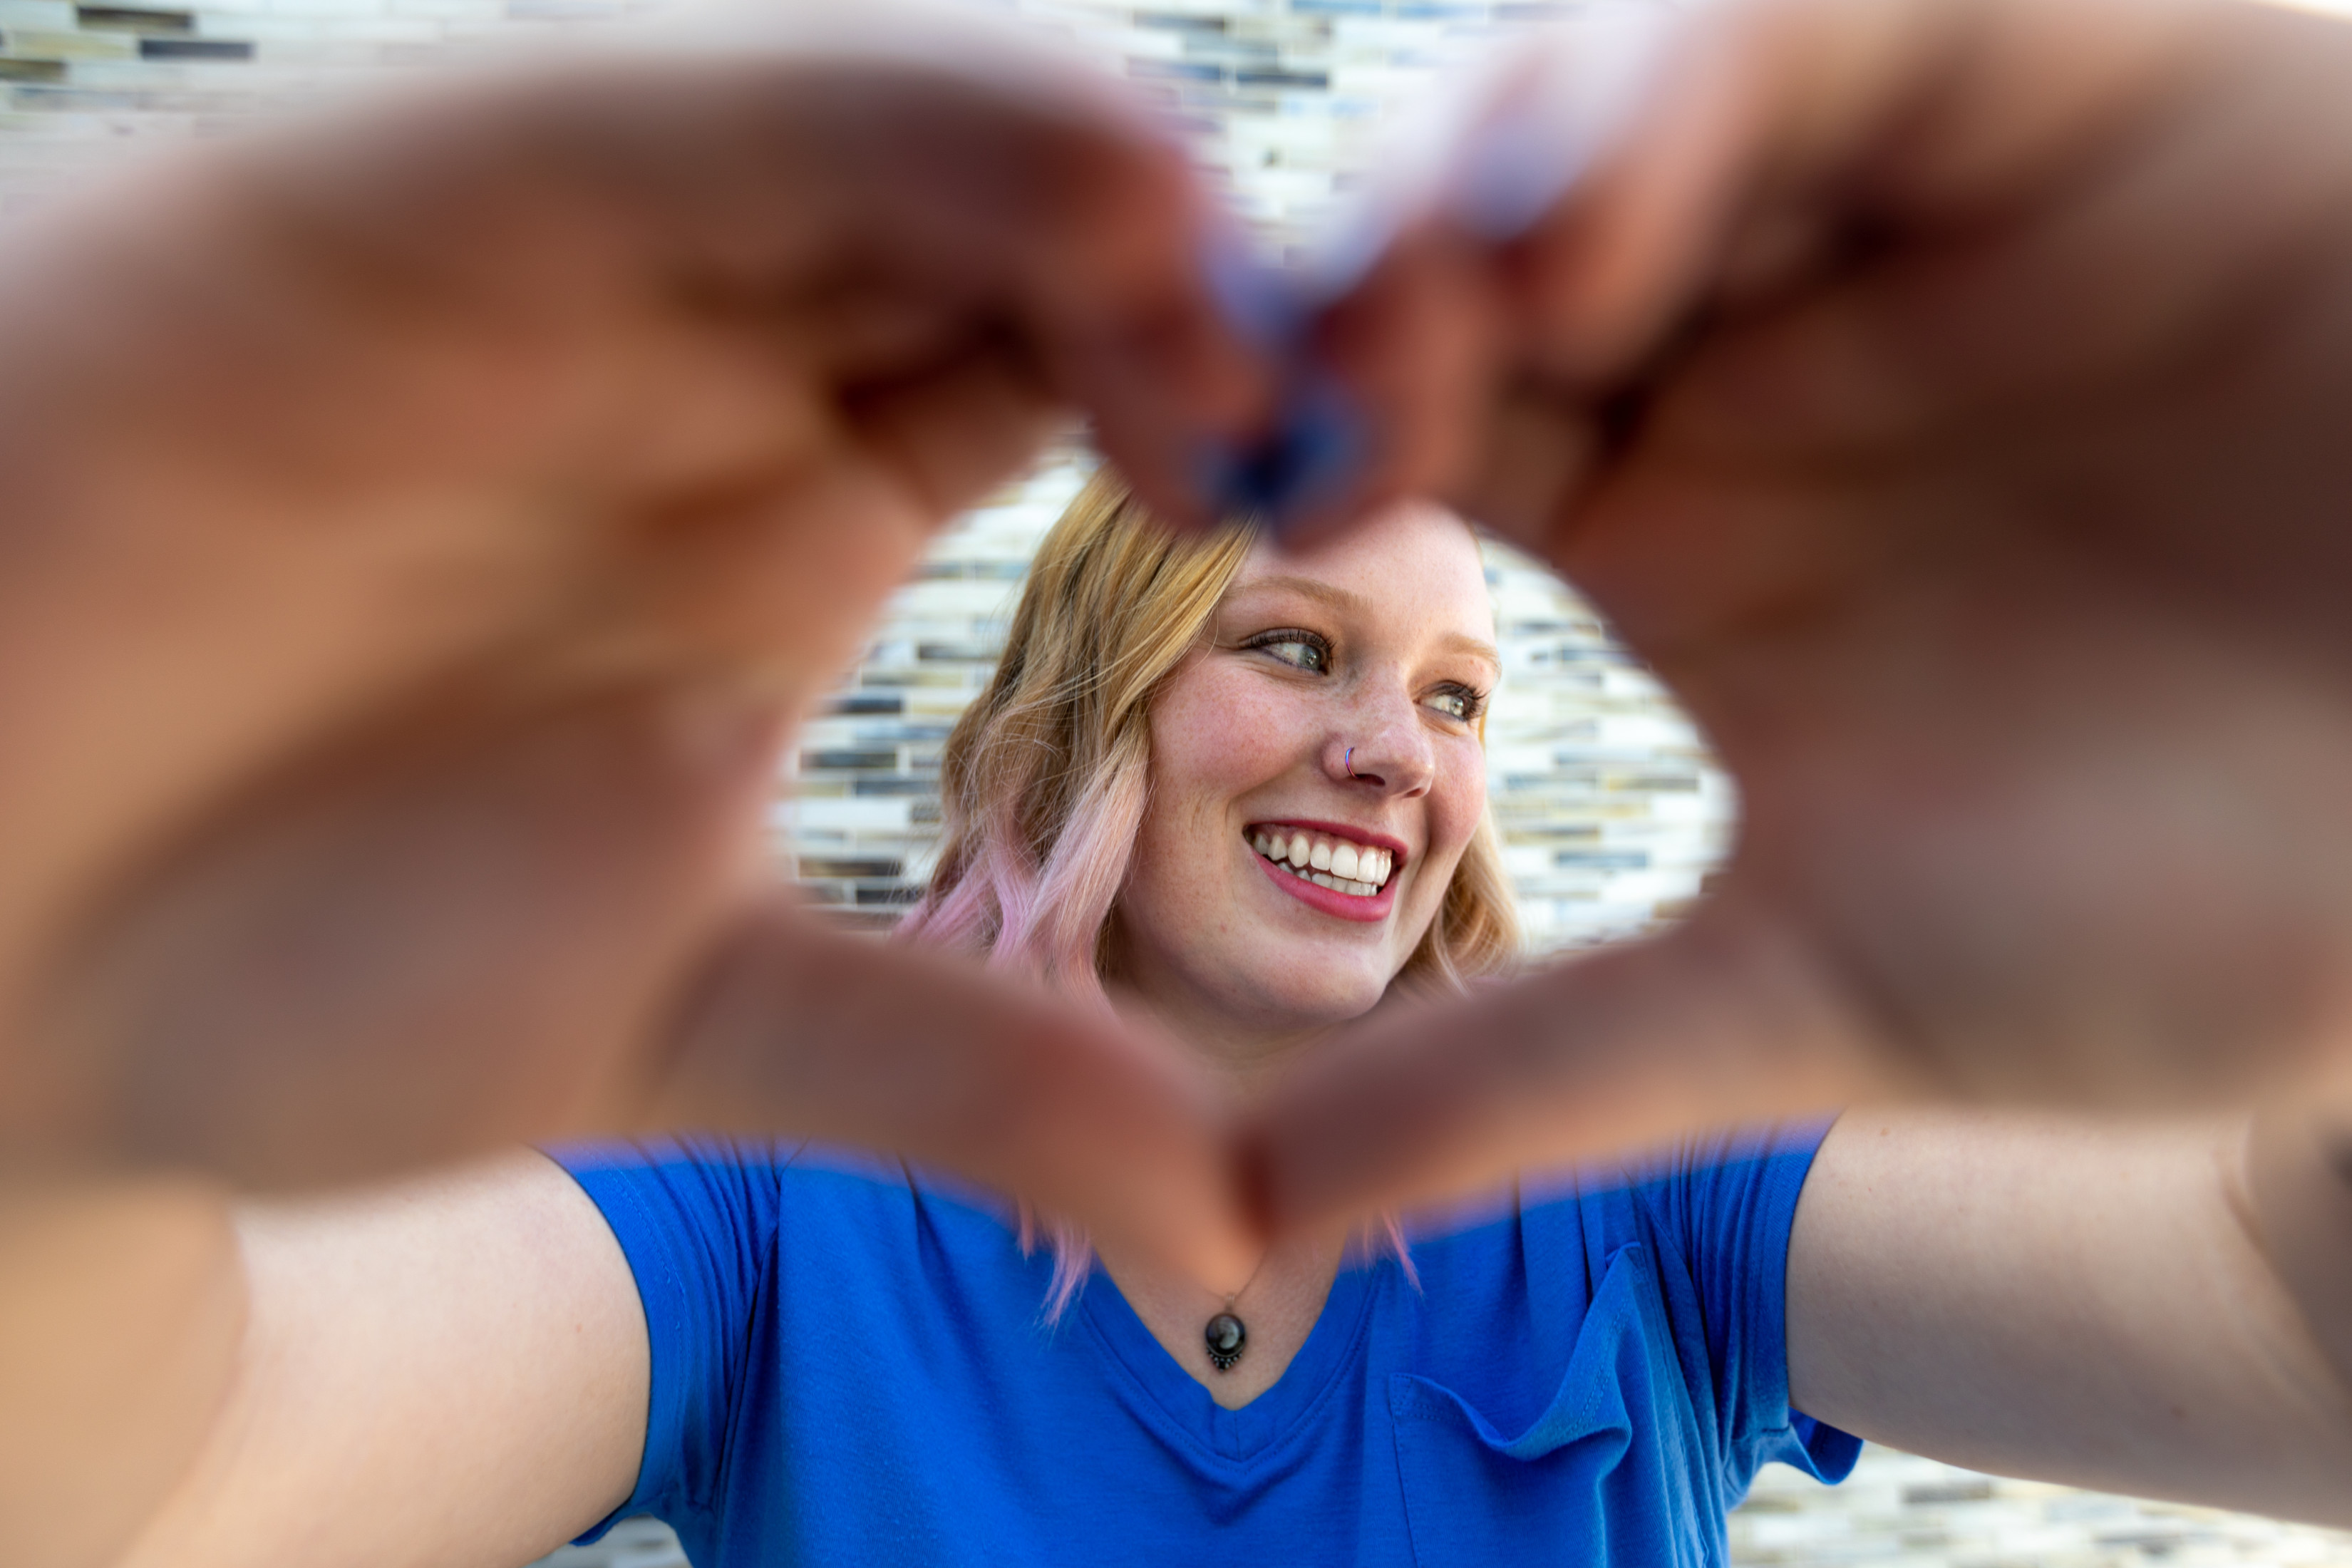 A student smiles while holding her hands in a heart shape near the camera lens